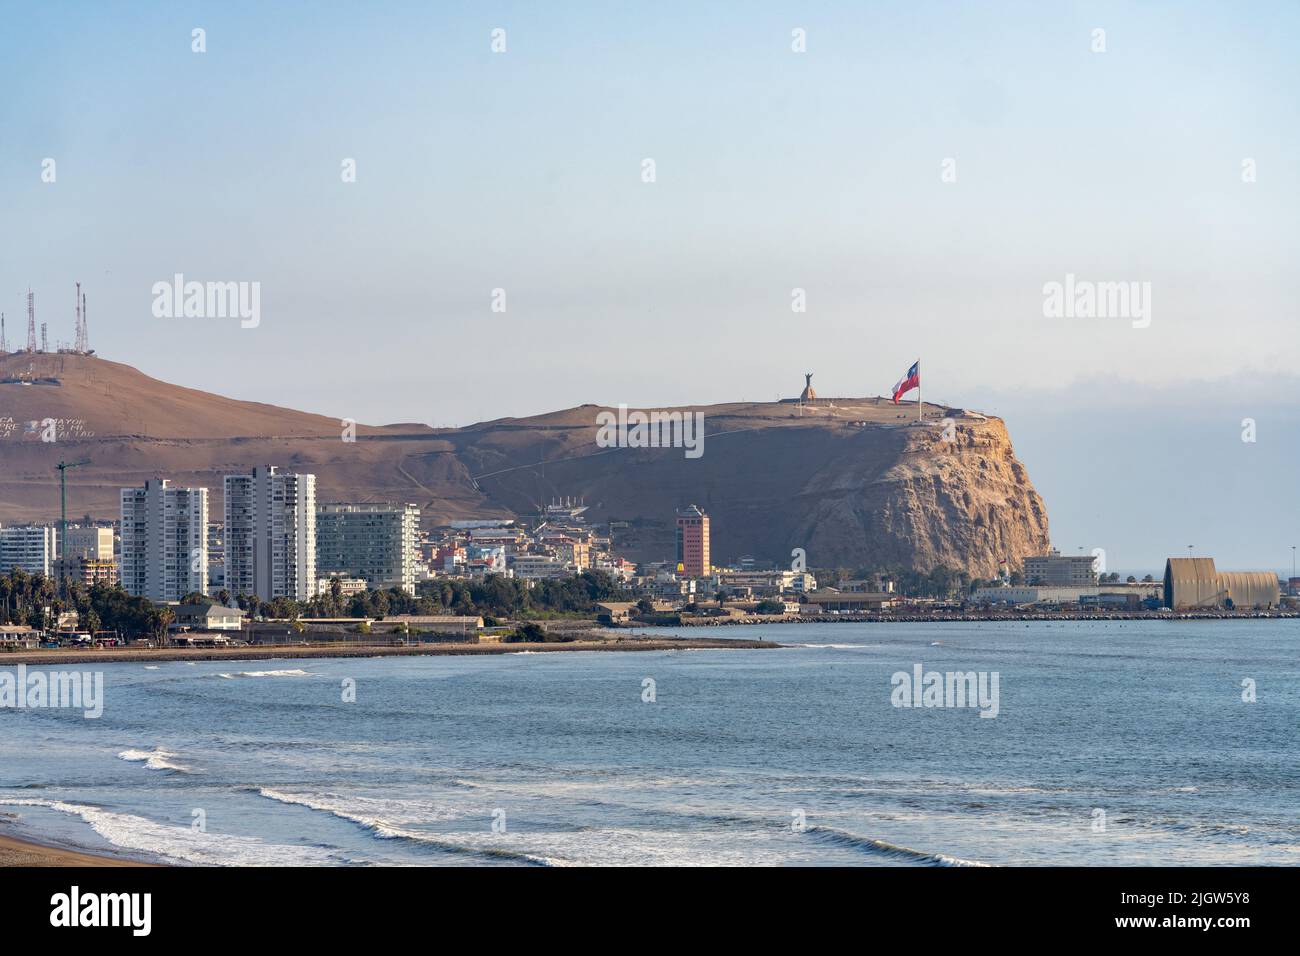 El Morro hill with its giant Chilean flag overlooks the Pacific Oean and the city of Arica, Chile. Stock Photo